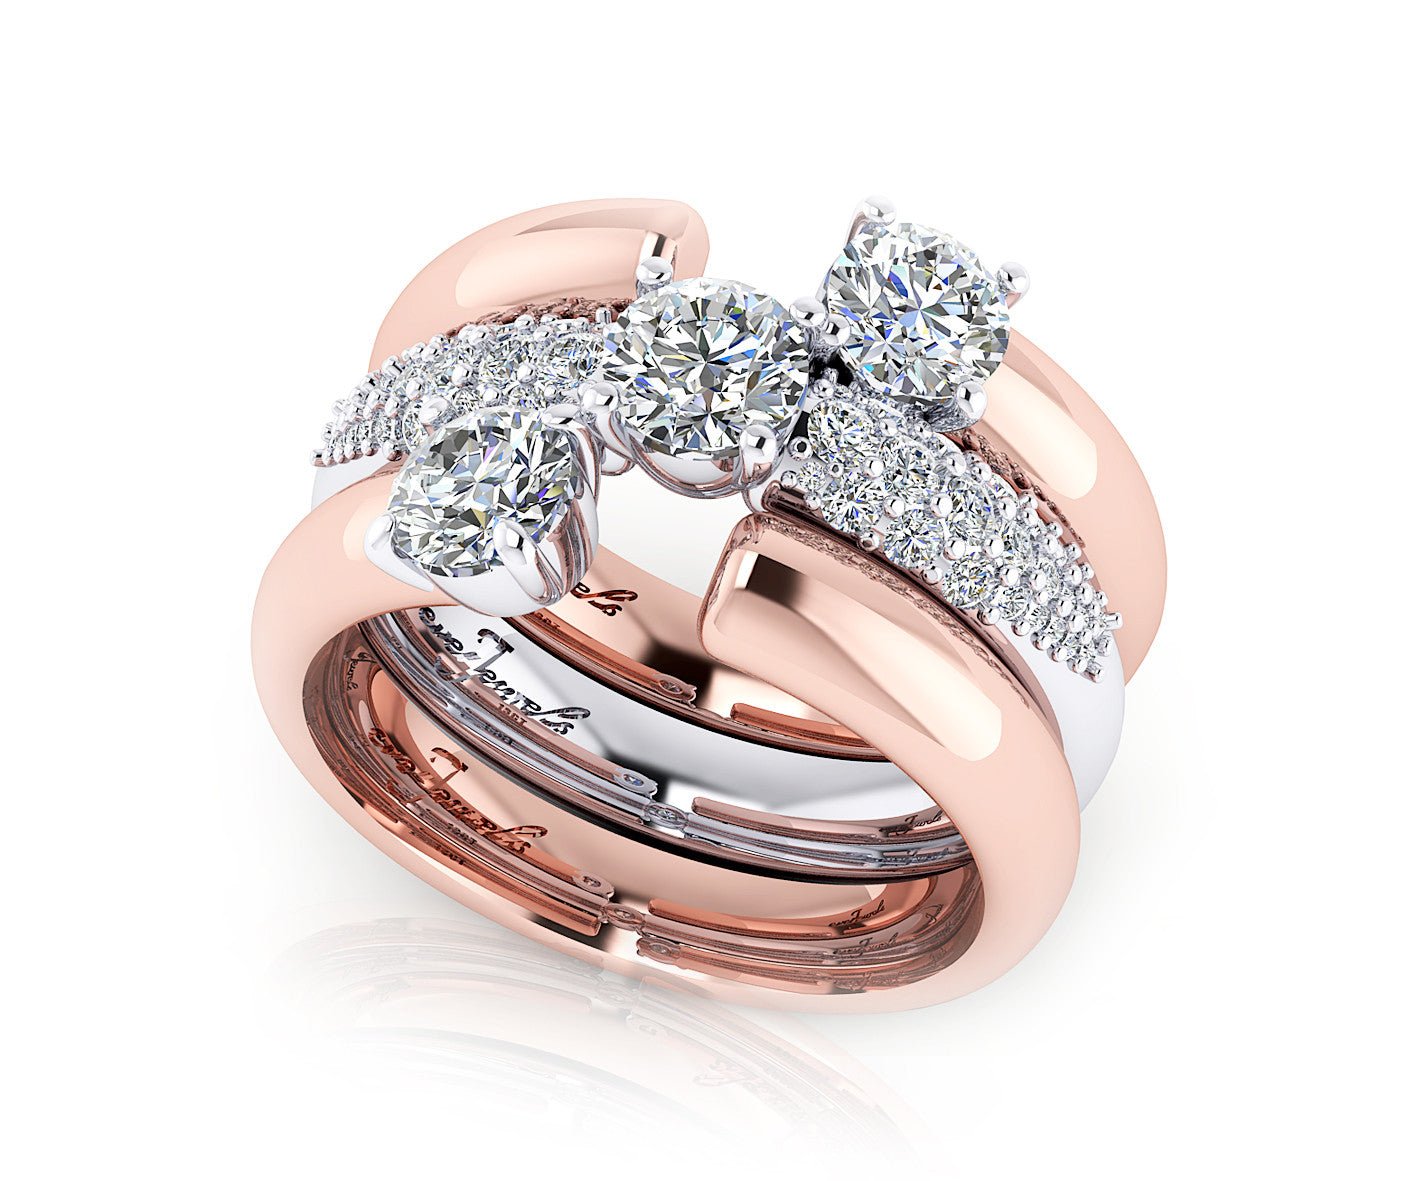 White and Rose Gold Diamond Stackable Dress Ring - ForeverJewels Design Studio 8